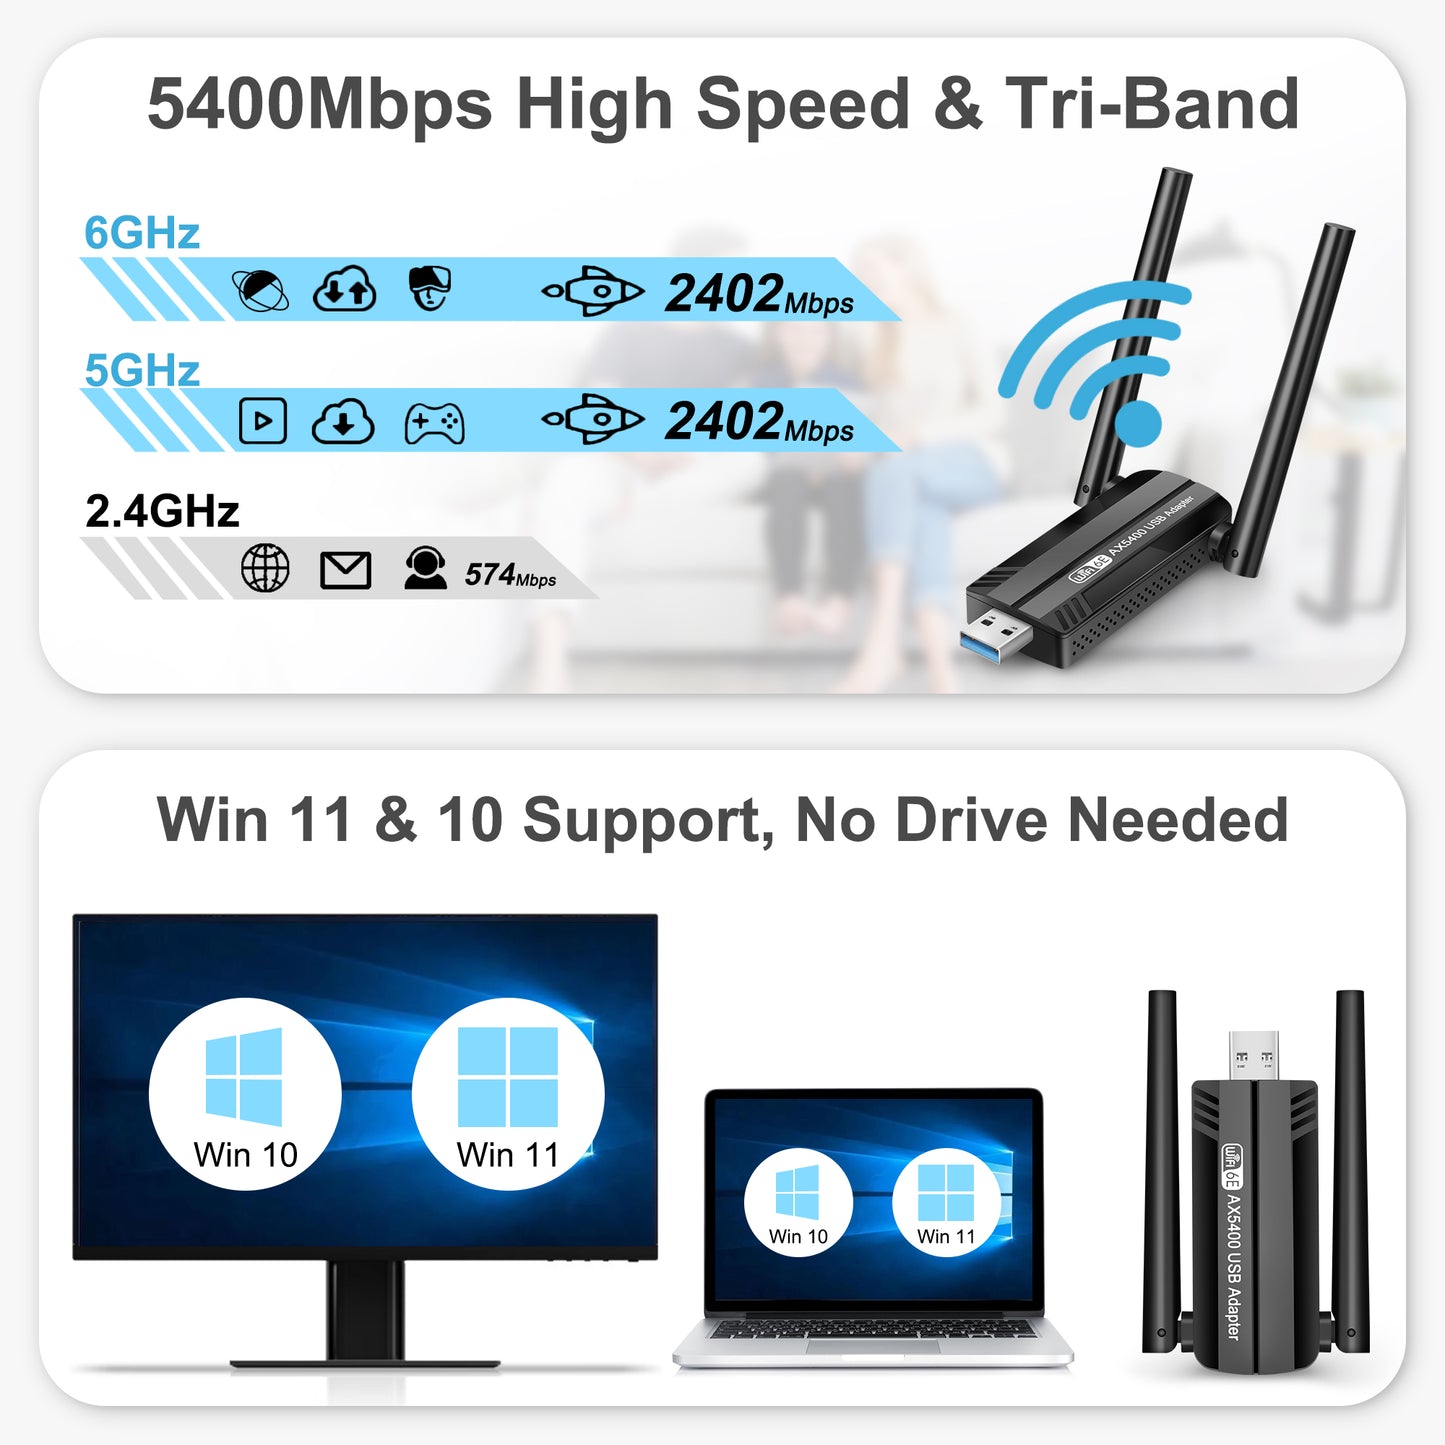 AX5400 802.11AX WiFi 6E USB 3.0 WiFi Adapter - with High gain Antenna for PC Laptop Tri Band 6GHz/5GHz/2.4GHz, WPA3, ,Only Compatible with Windows 11/10, Driver free (Black)